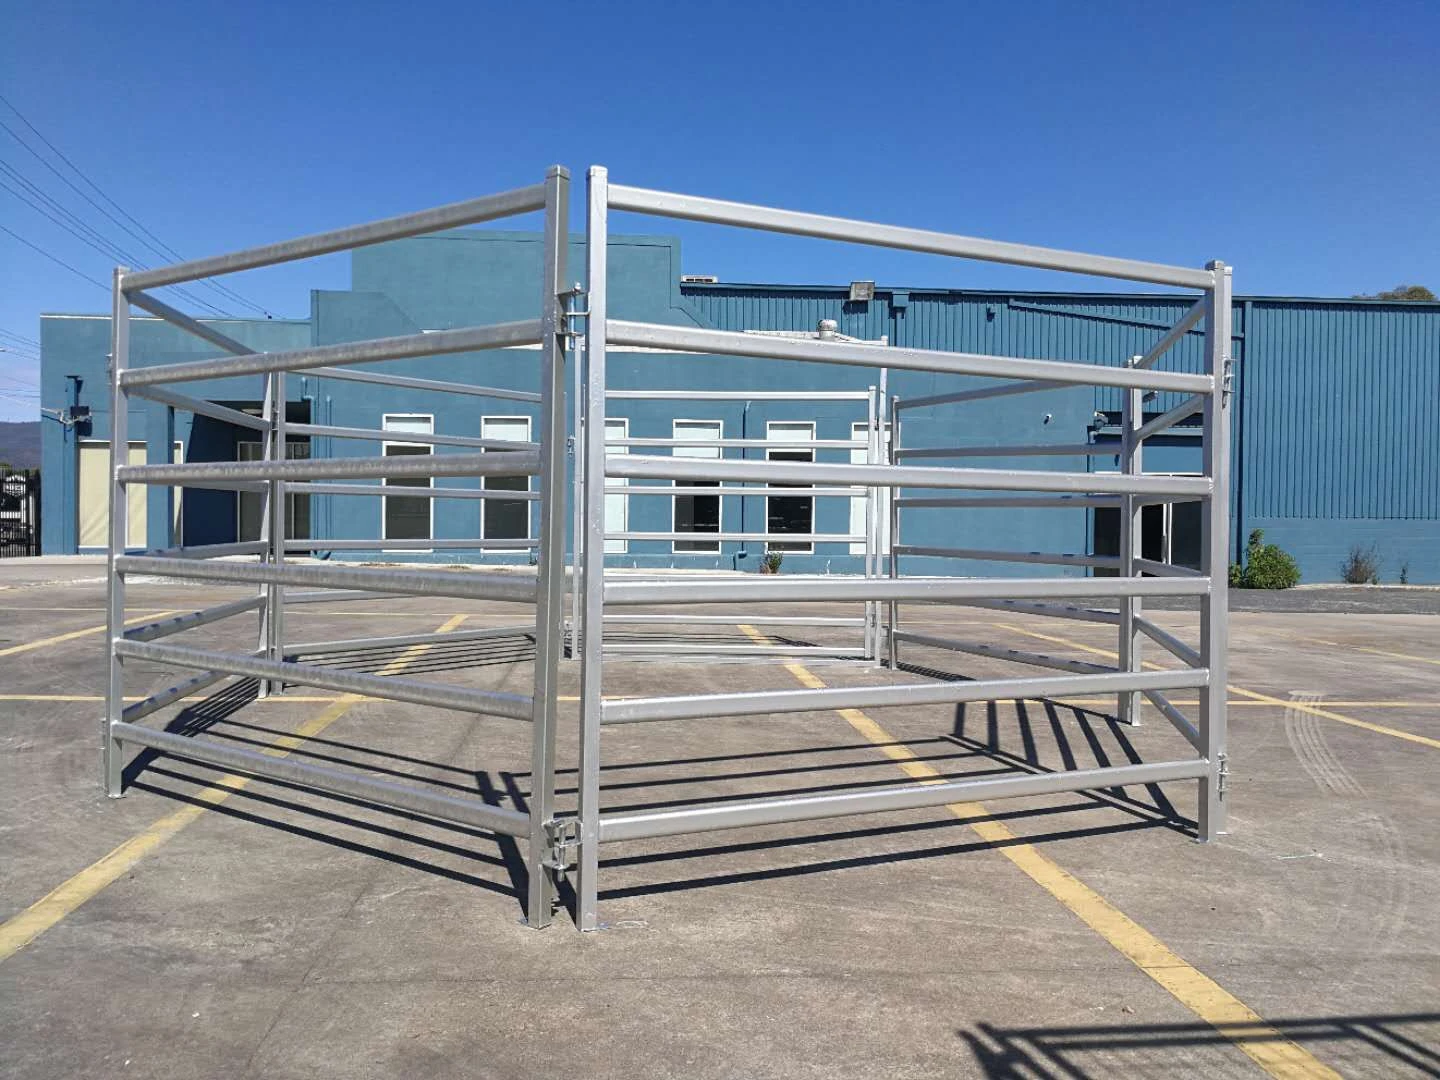 Higher Quality Metallic Fence Panel For Keeping Cattles